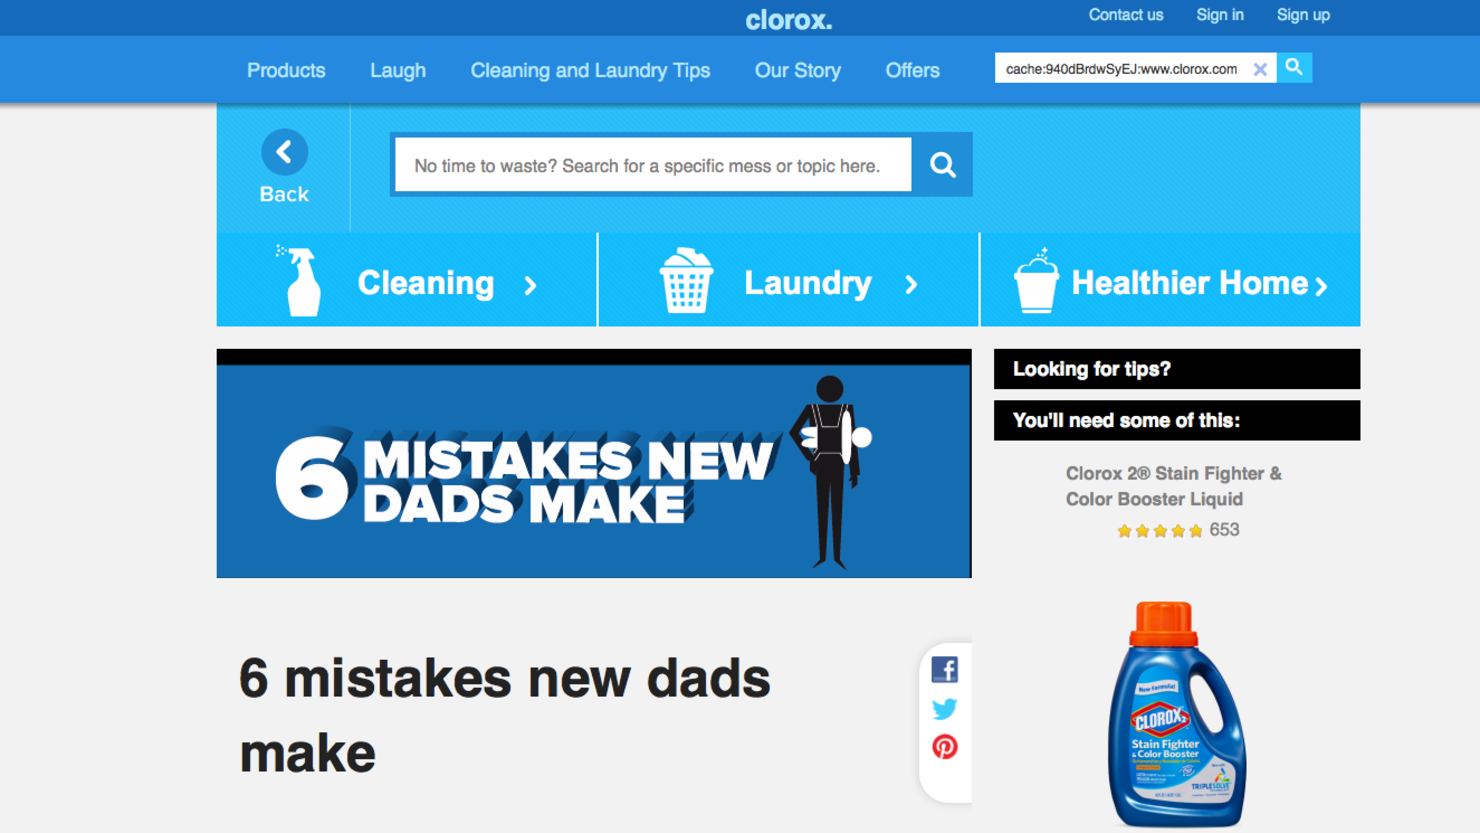 Clorox pulled what was intended to be a humorous Web post listing the shortcomings of new fathers after an internet uproar